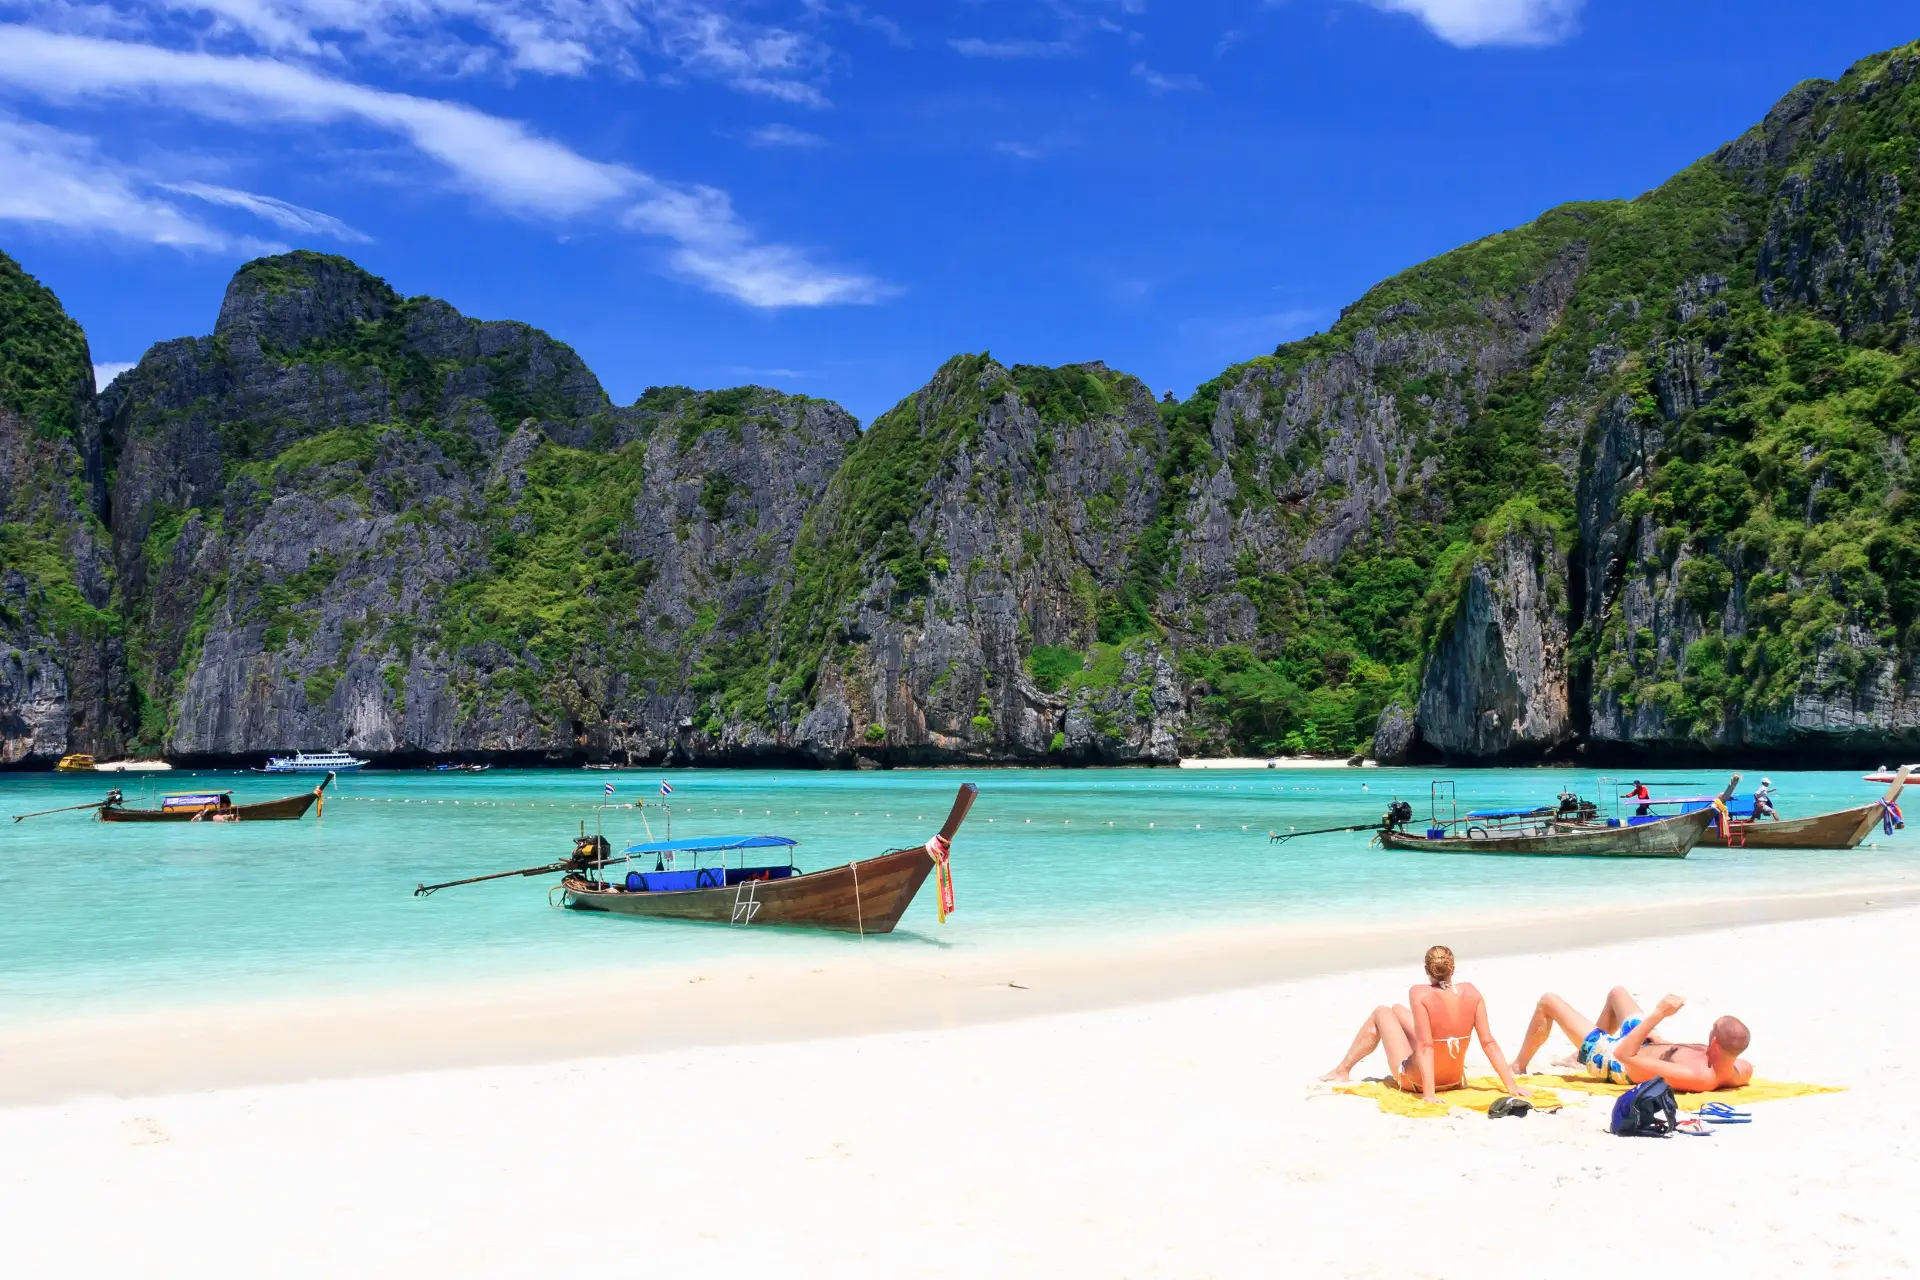 A Guide to Things to Do in Phuket